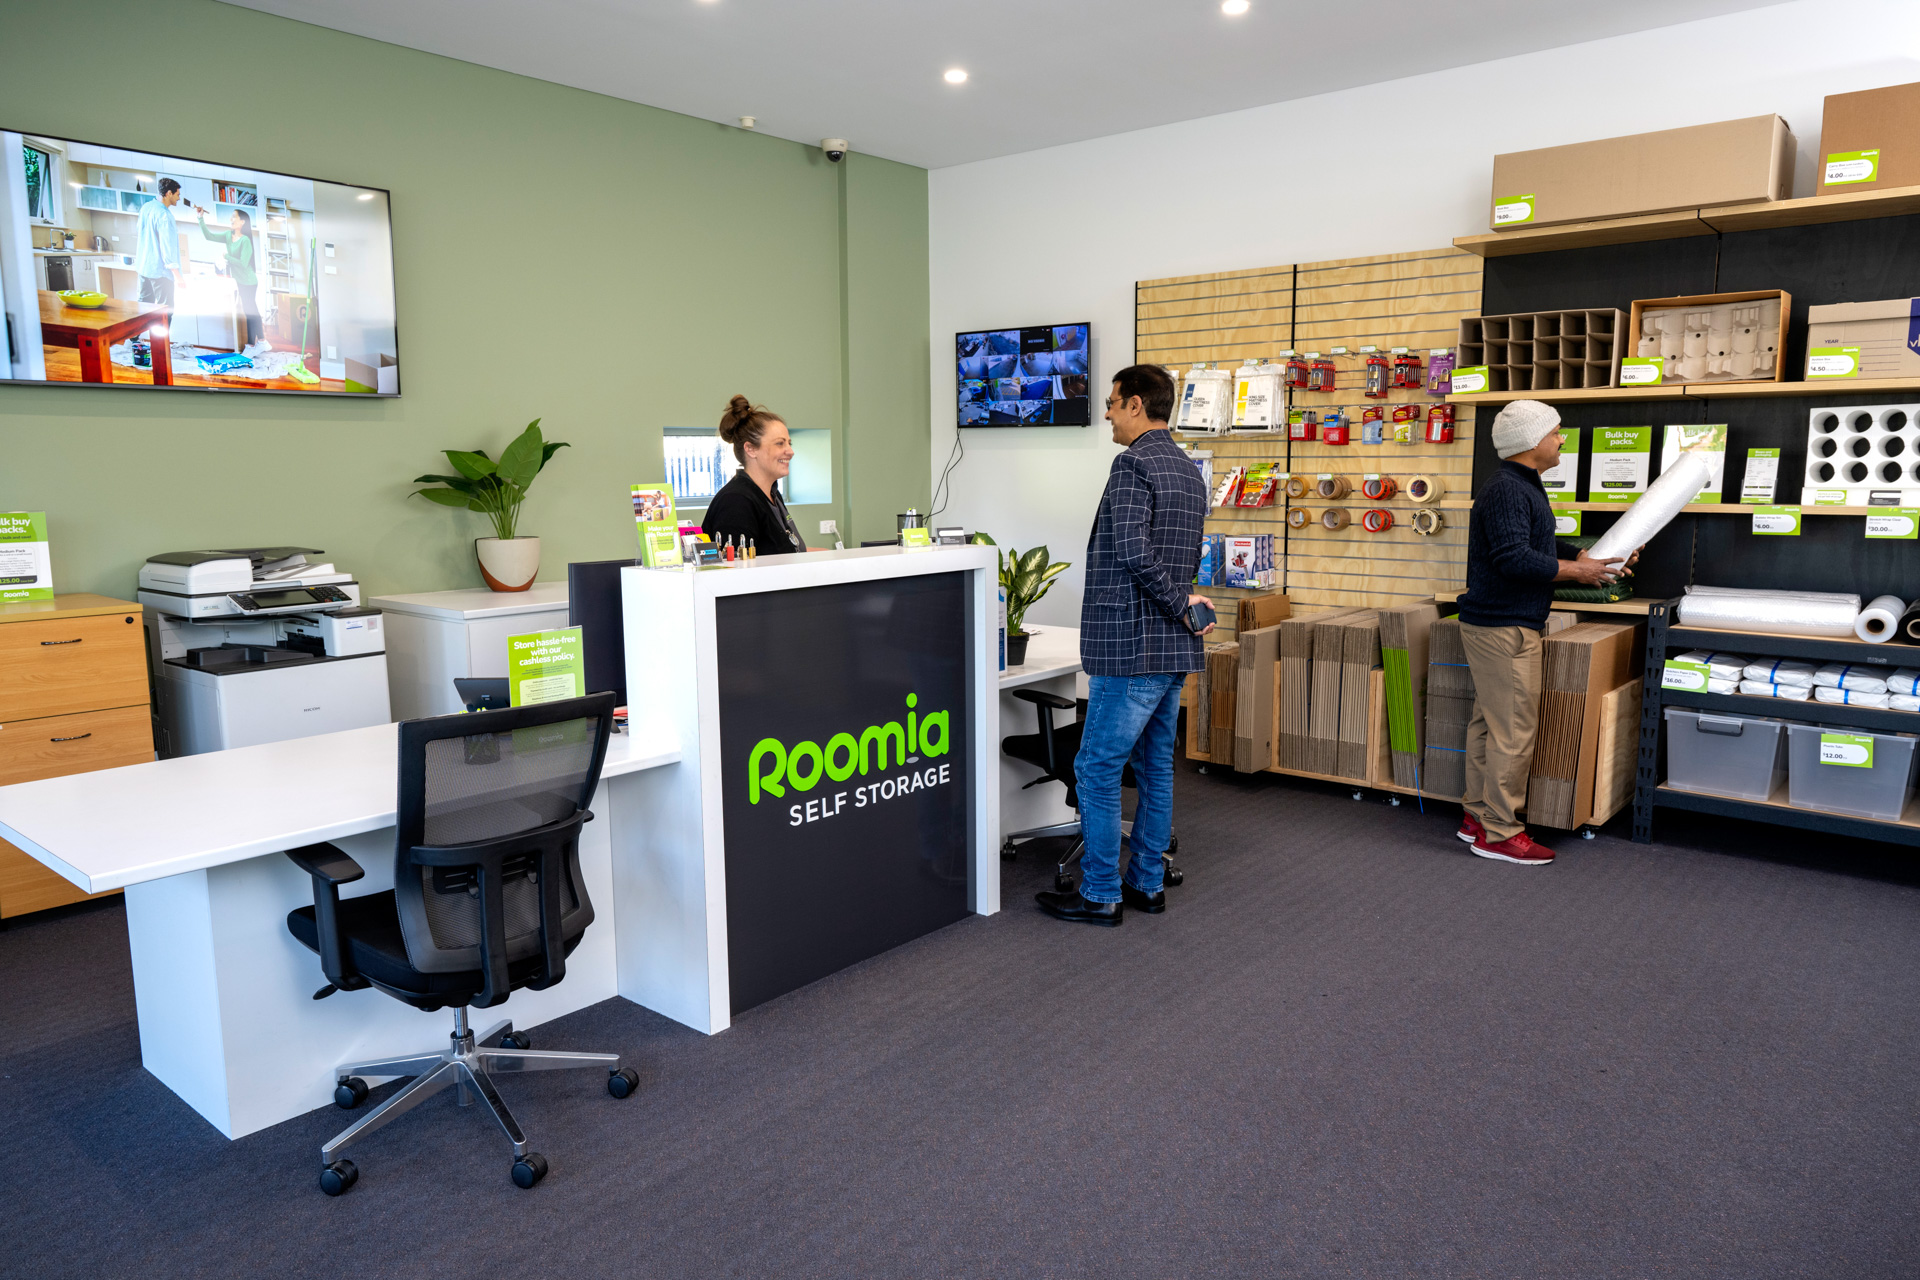 Attentive staff at Roomia Beverley self storage facility assisting a customer with a warm smile, ensuring a seamless and pleasant storage experience.